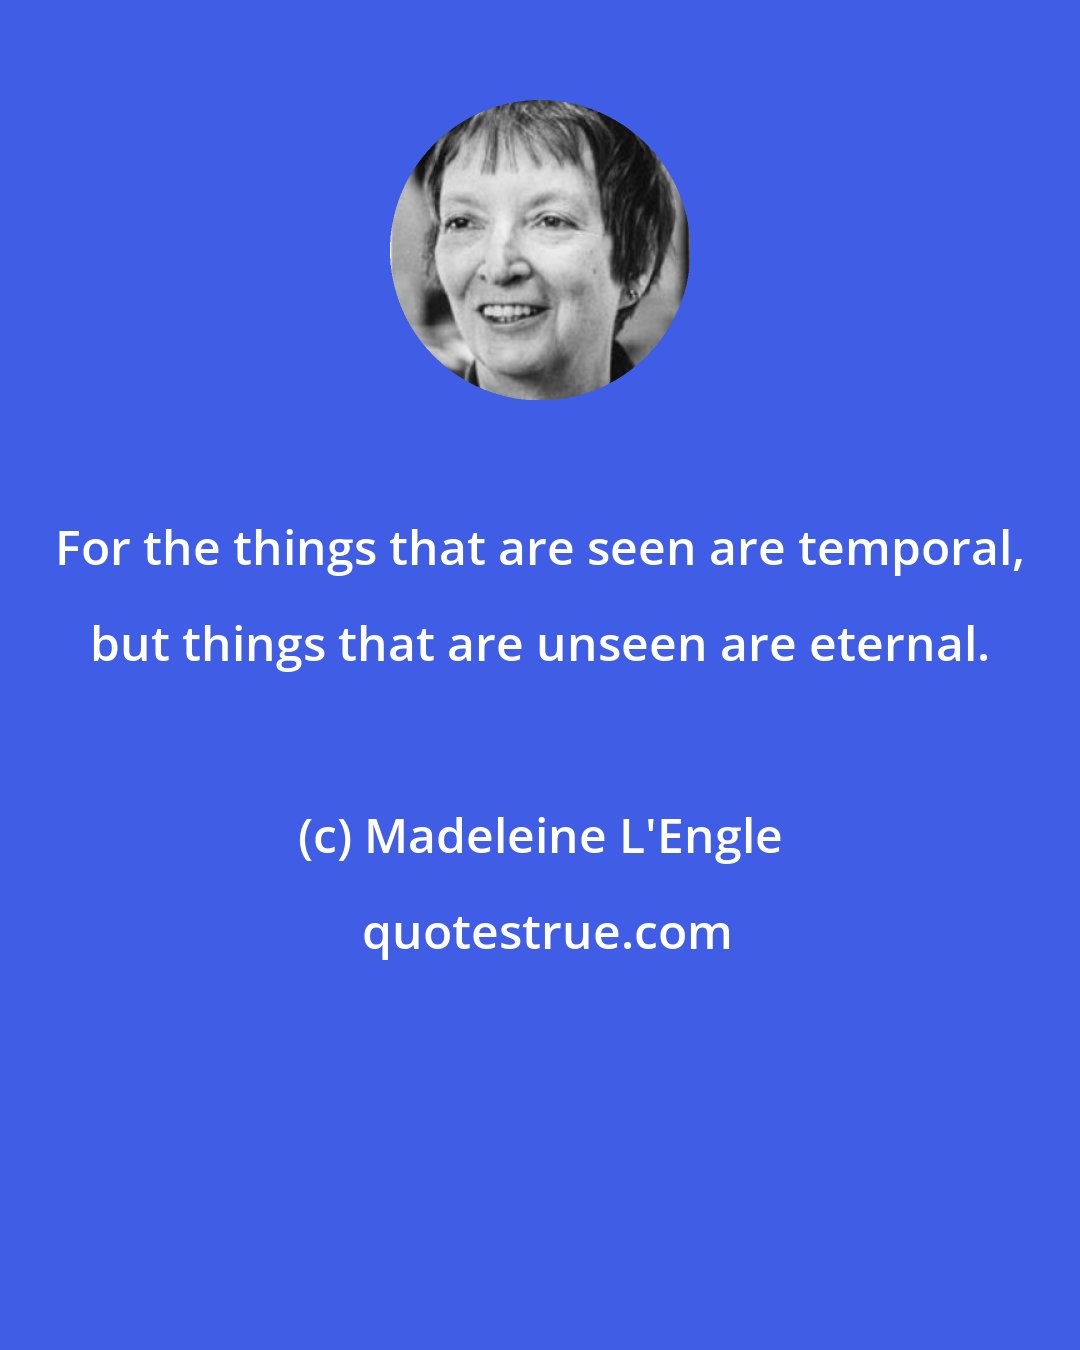 Madeleine L'Engle: For the things that are seen are temporal, but things that are unseen are eternal.